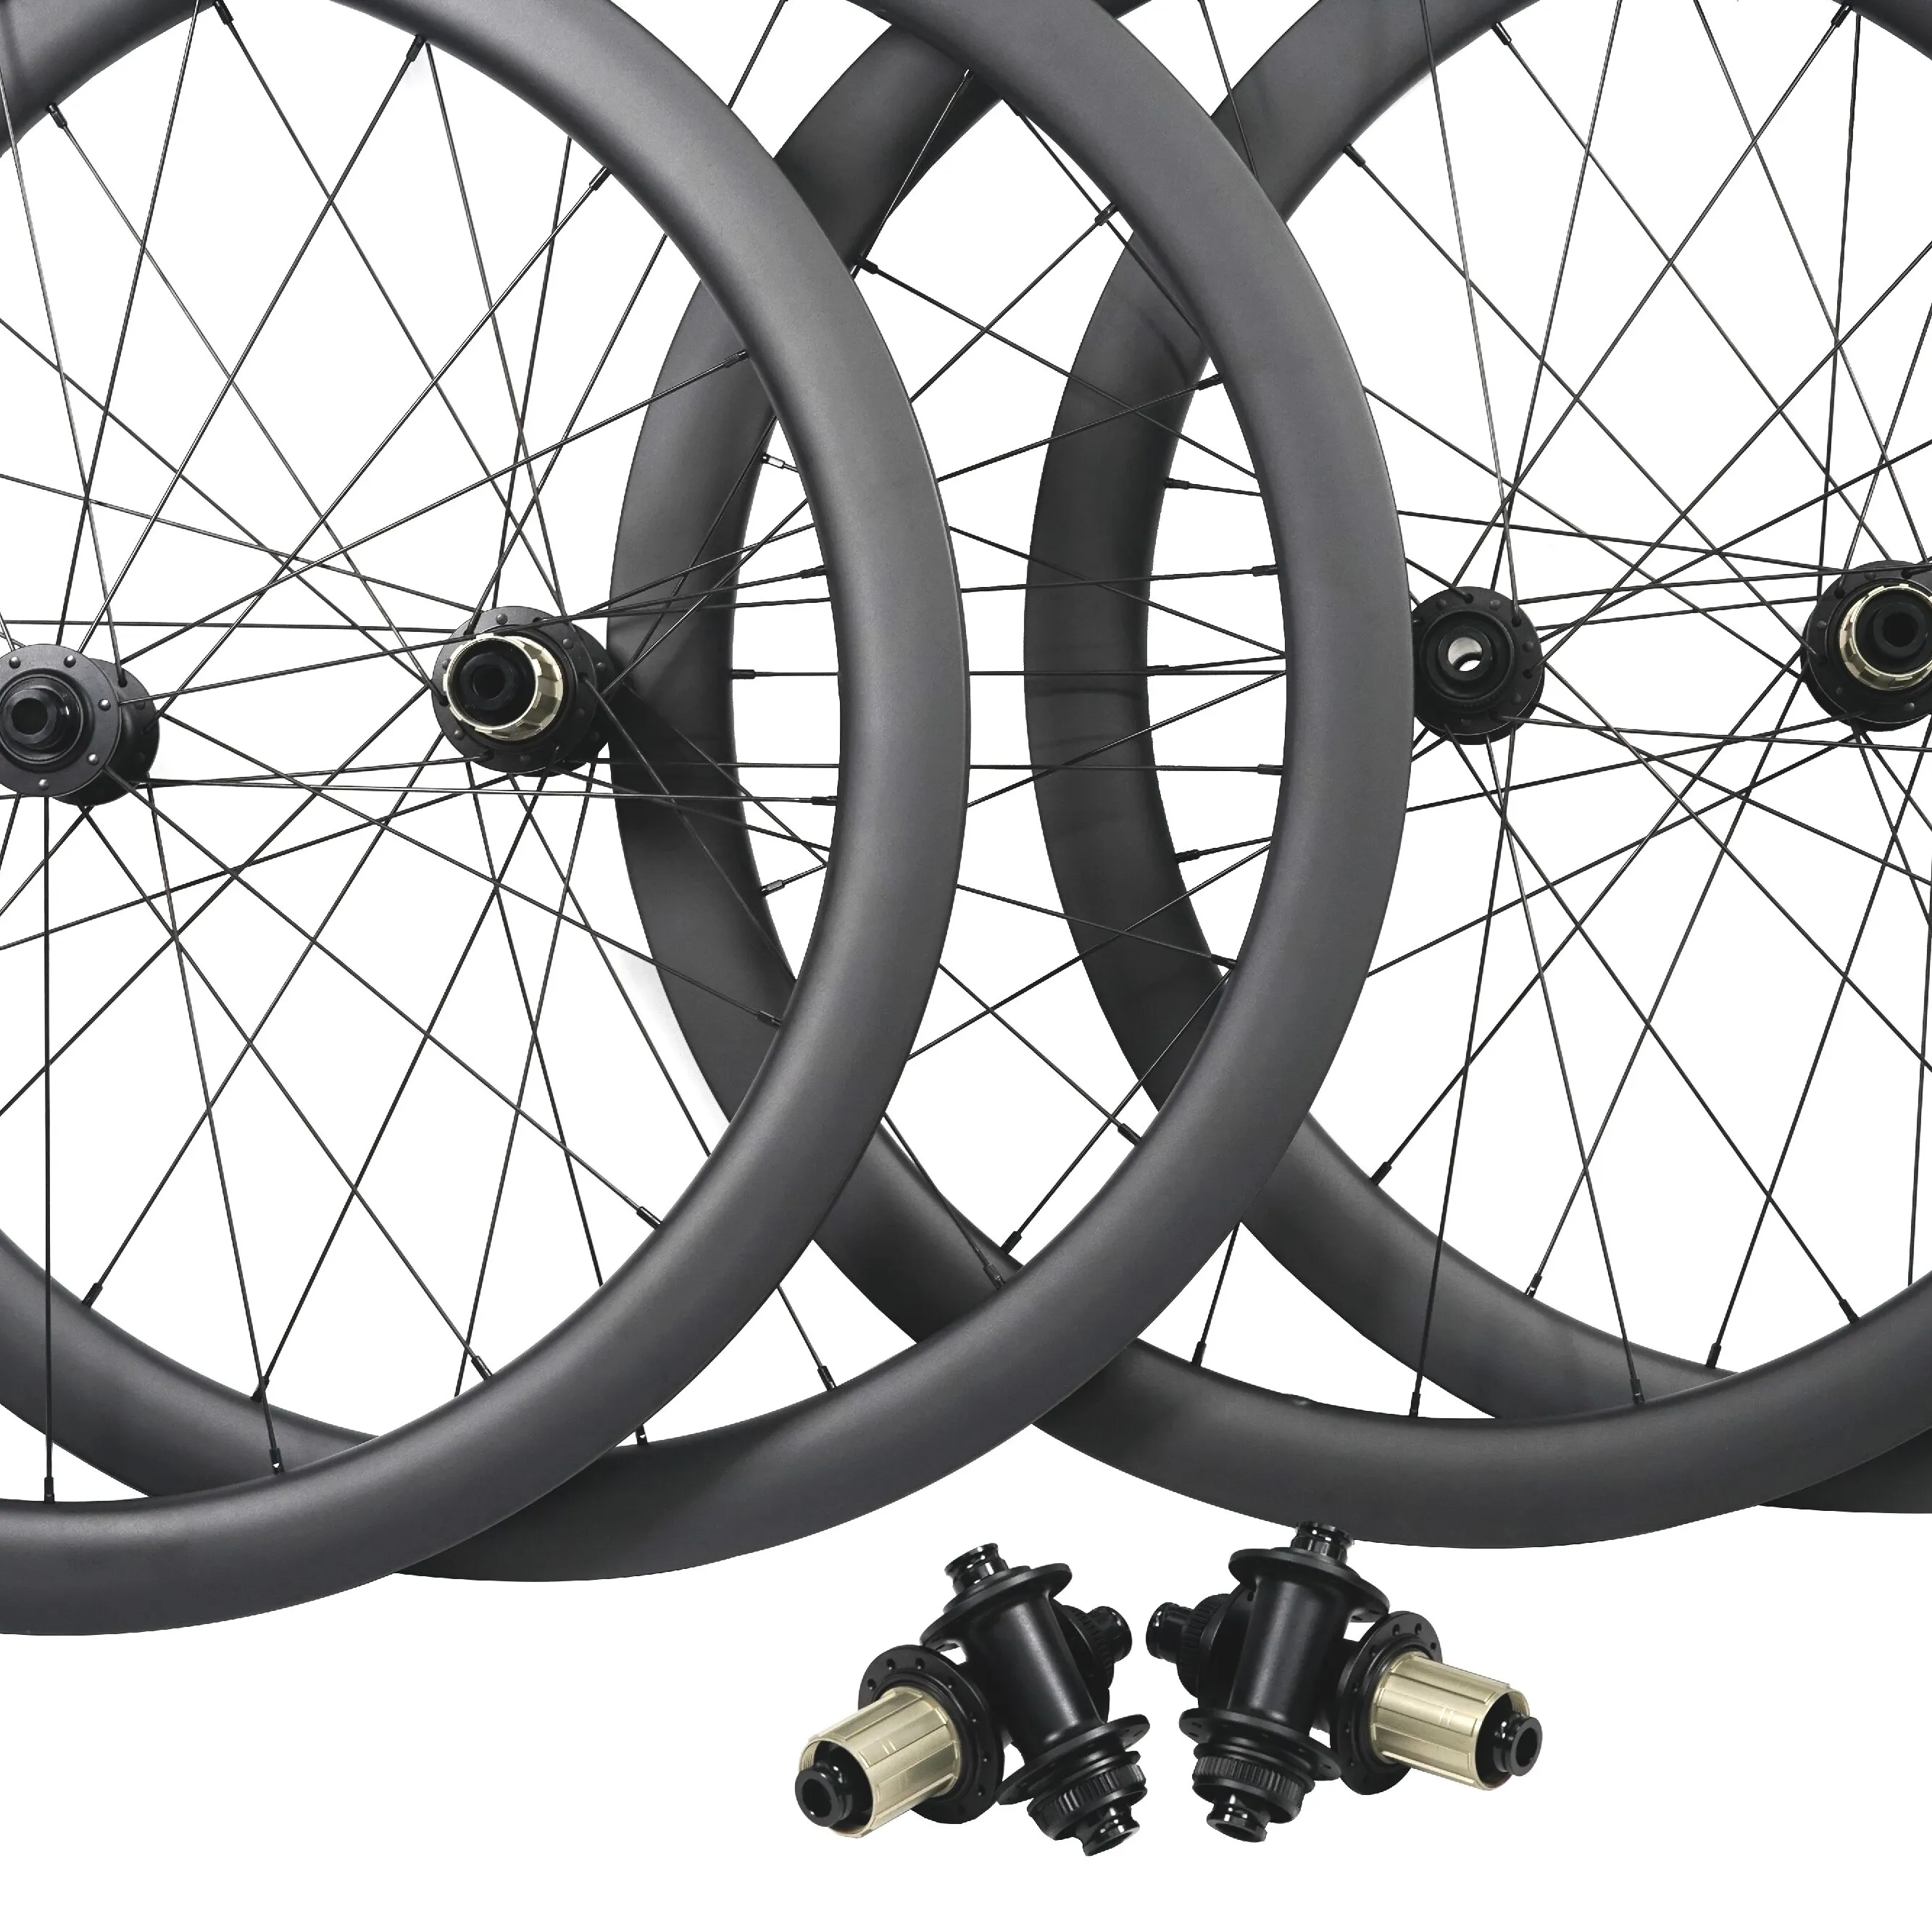 Farsports road bike carbon wheels 700c disc brake wheels with customized configurations for option